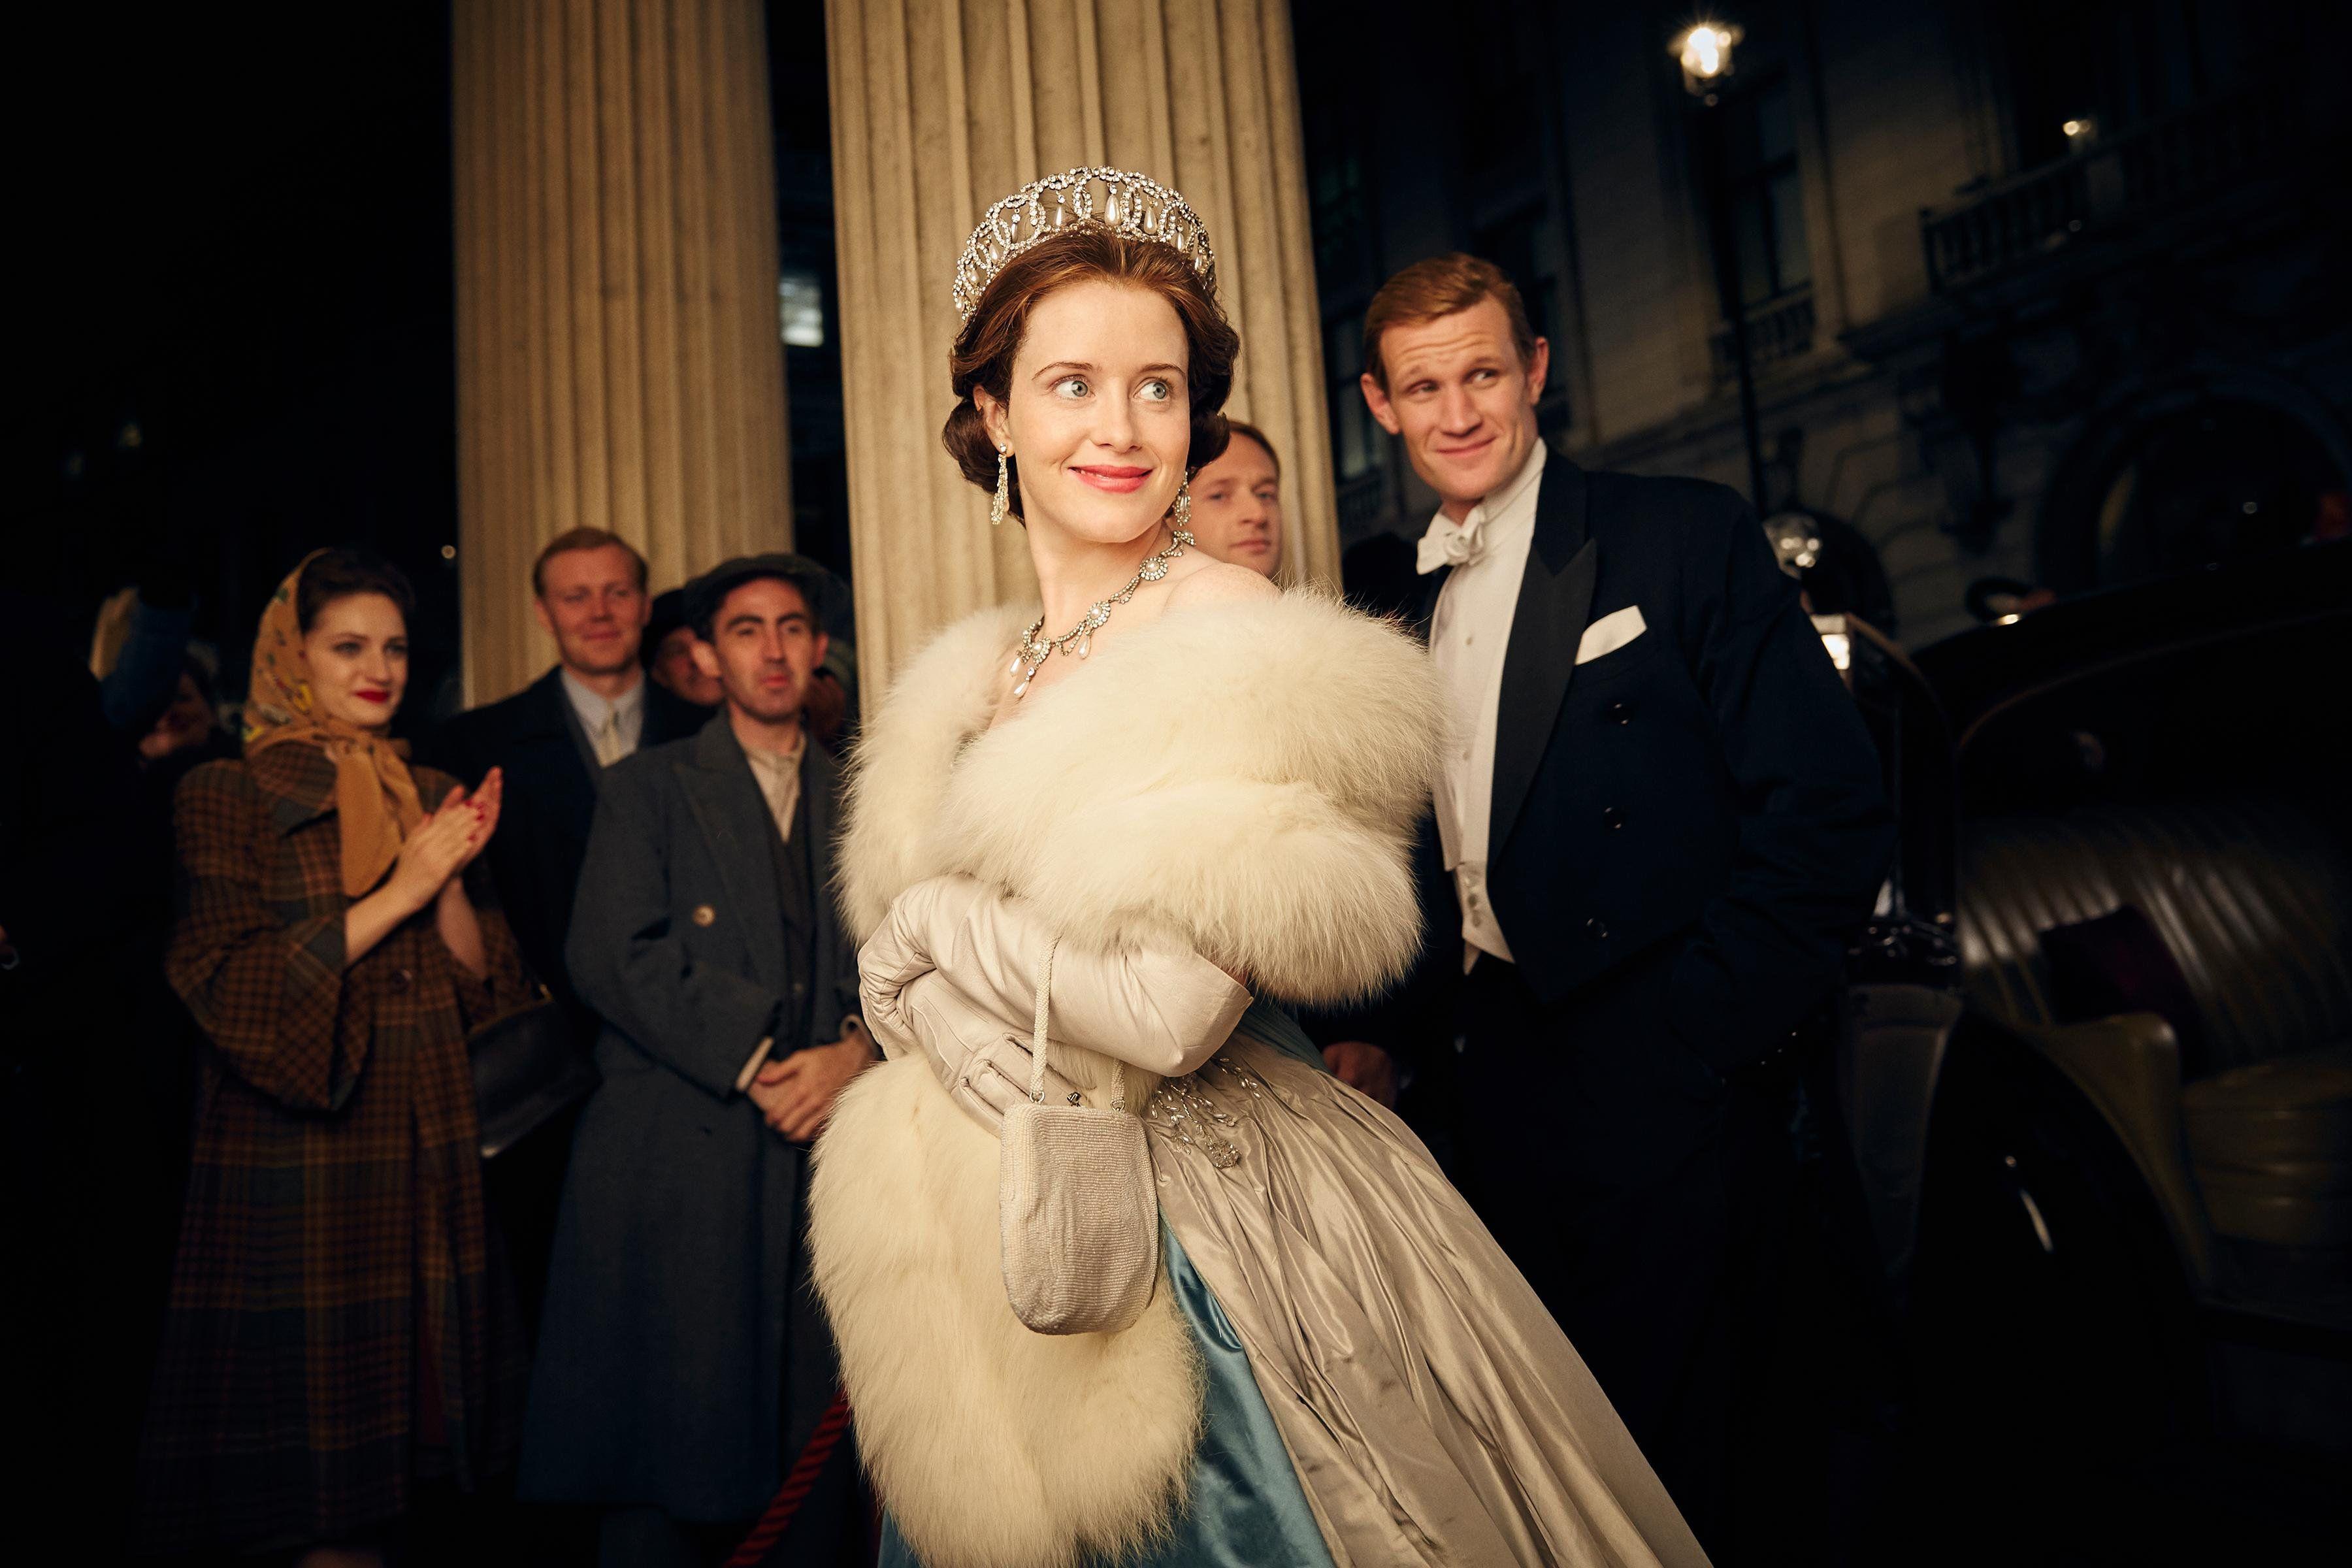 Claire became a household name following her role as Queen Elizabeth in The Crown